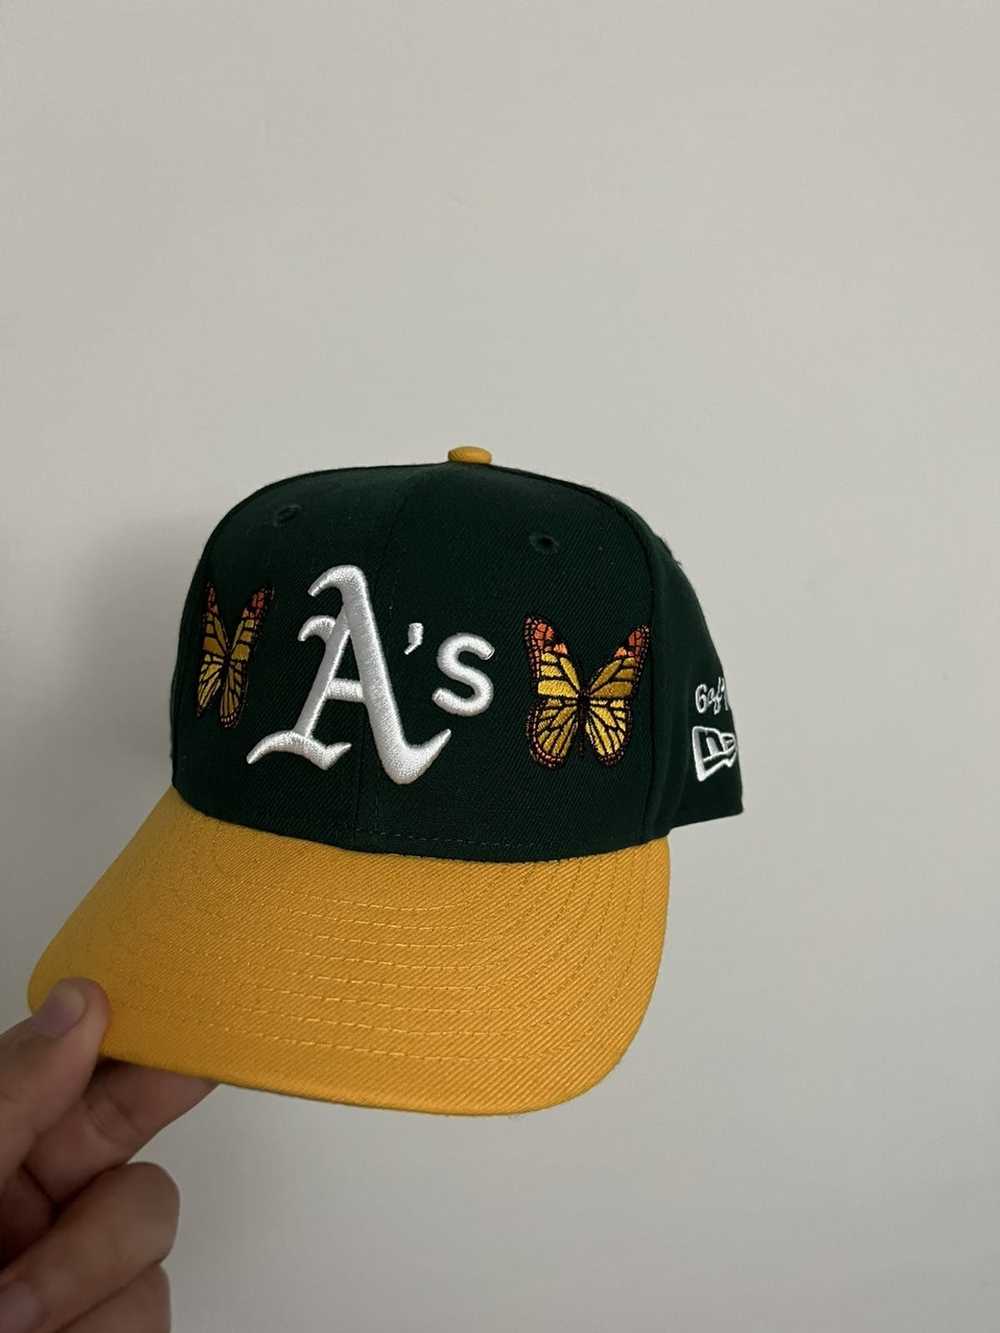 New! Rare! Oakland A's 2021 4th of July On Field Hat New Era